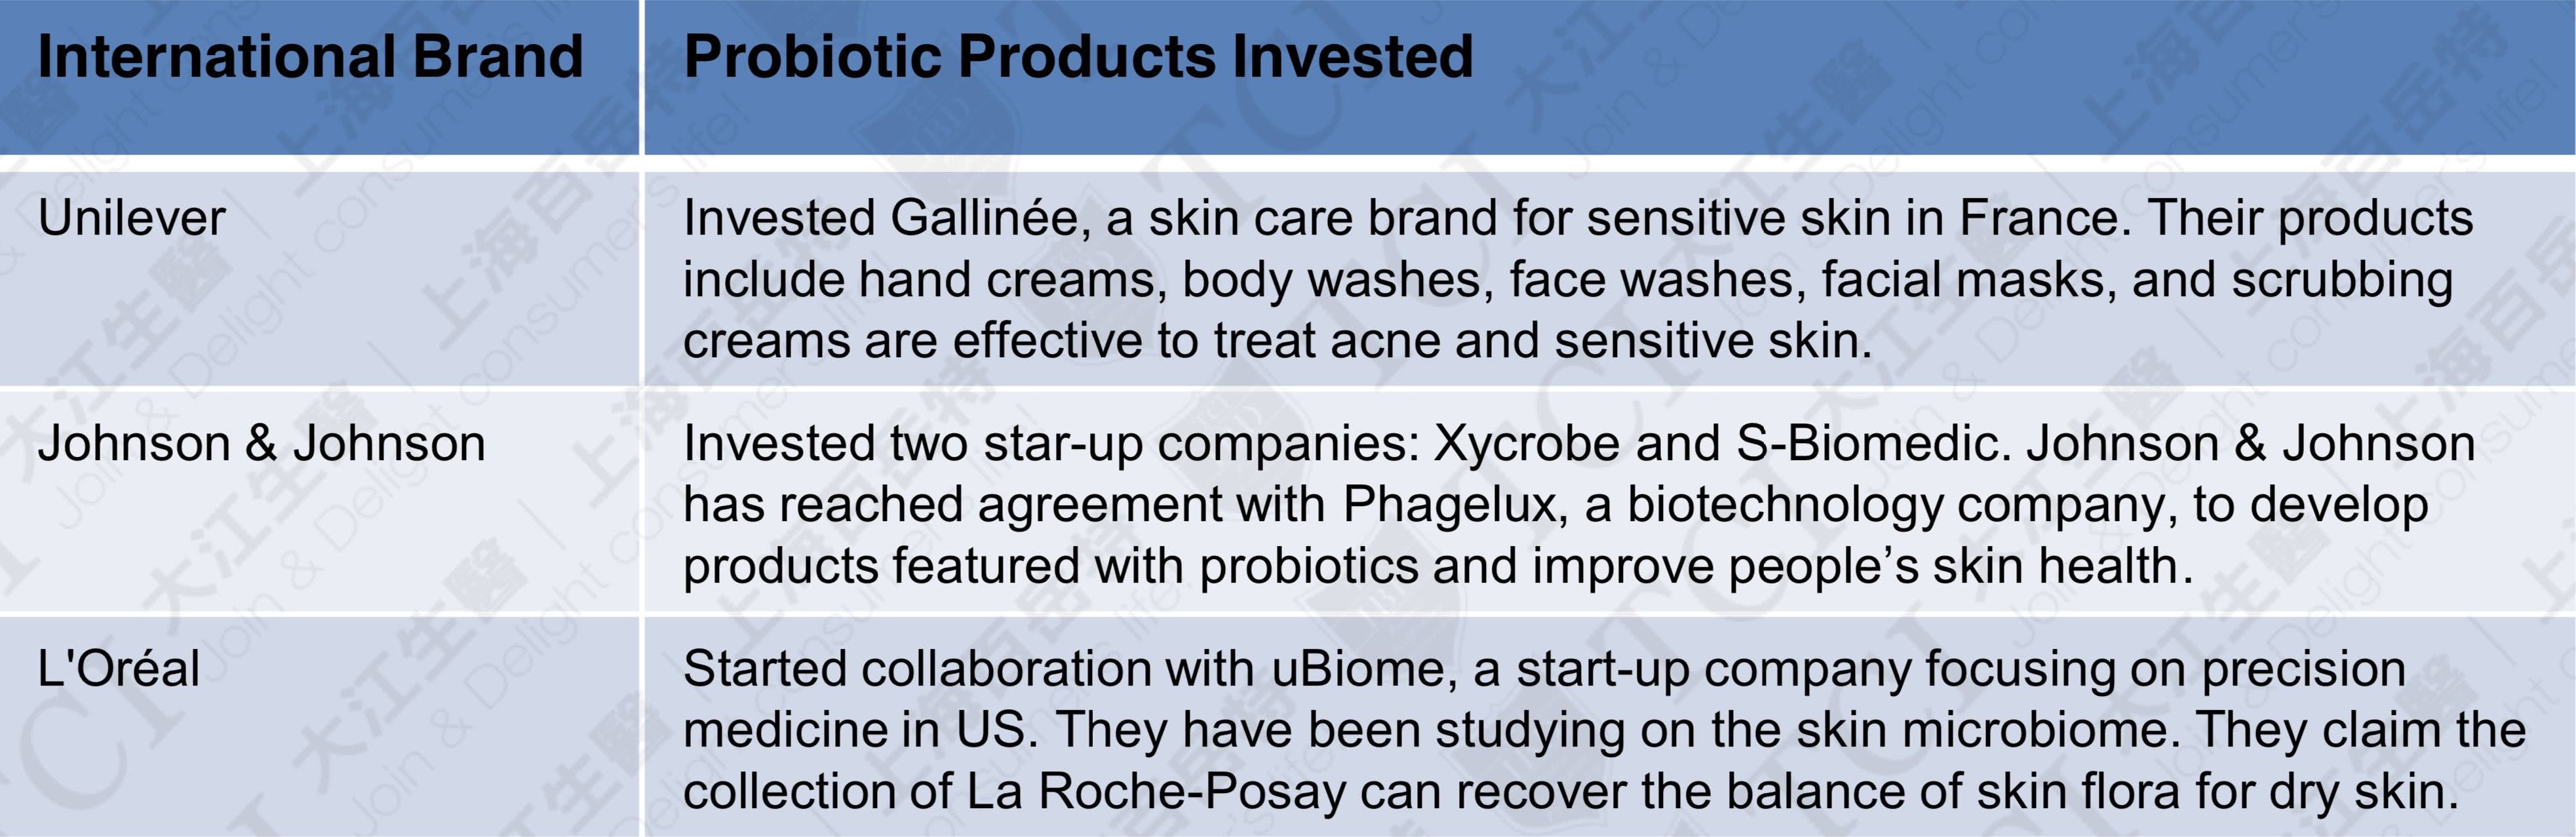 The investments for probiotic skin care products from international skin care manufacturers, Data source: TCI